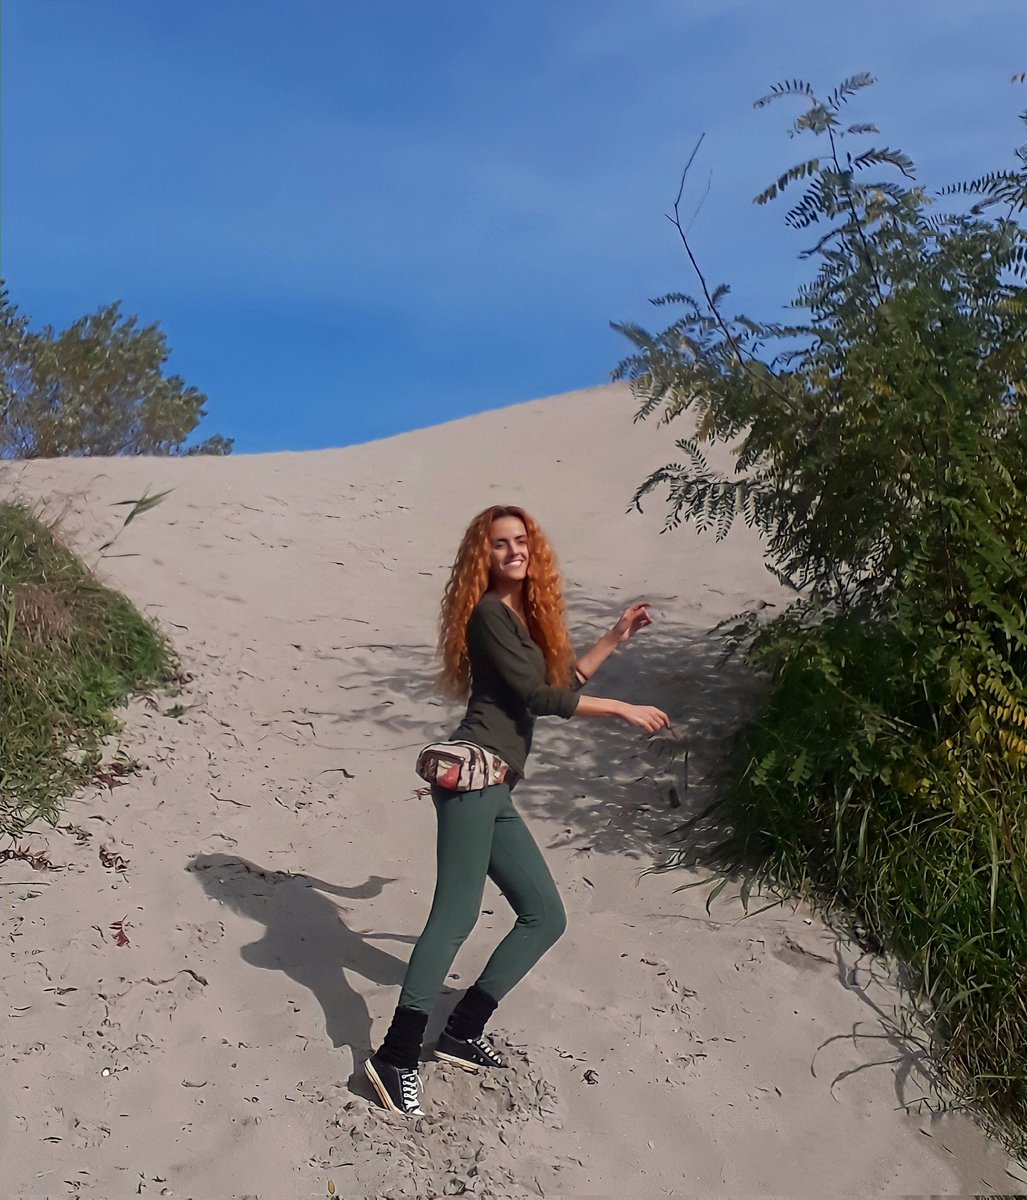 Having escape place for today!
I am not sure where am I, at the beach or near the forest, is it Summer or Autumn? ☀️🍁🙈
It s beautifully confusing and this is my 'Dune' 🌿🏜
@NellyMonk1

#sanddunes #sandtime #sandplaytherapy #sunnyday☀️ #happyme #curlsoncurls #GingerGirls